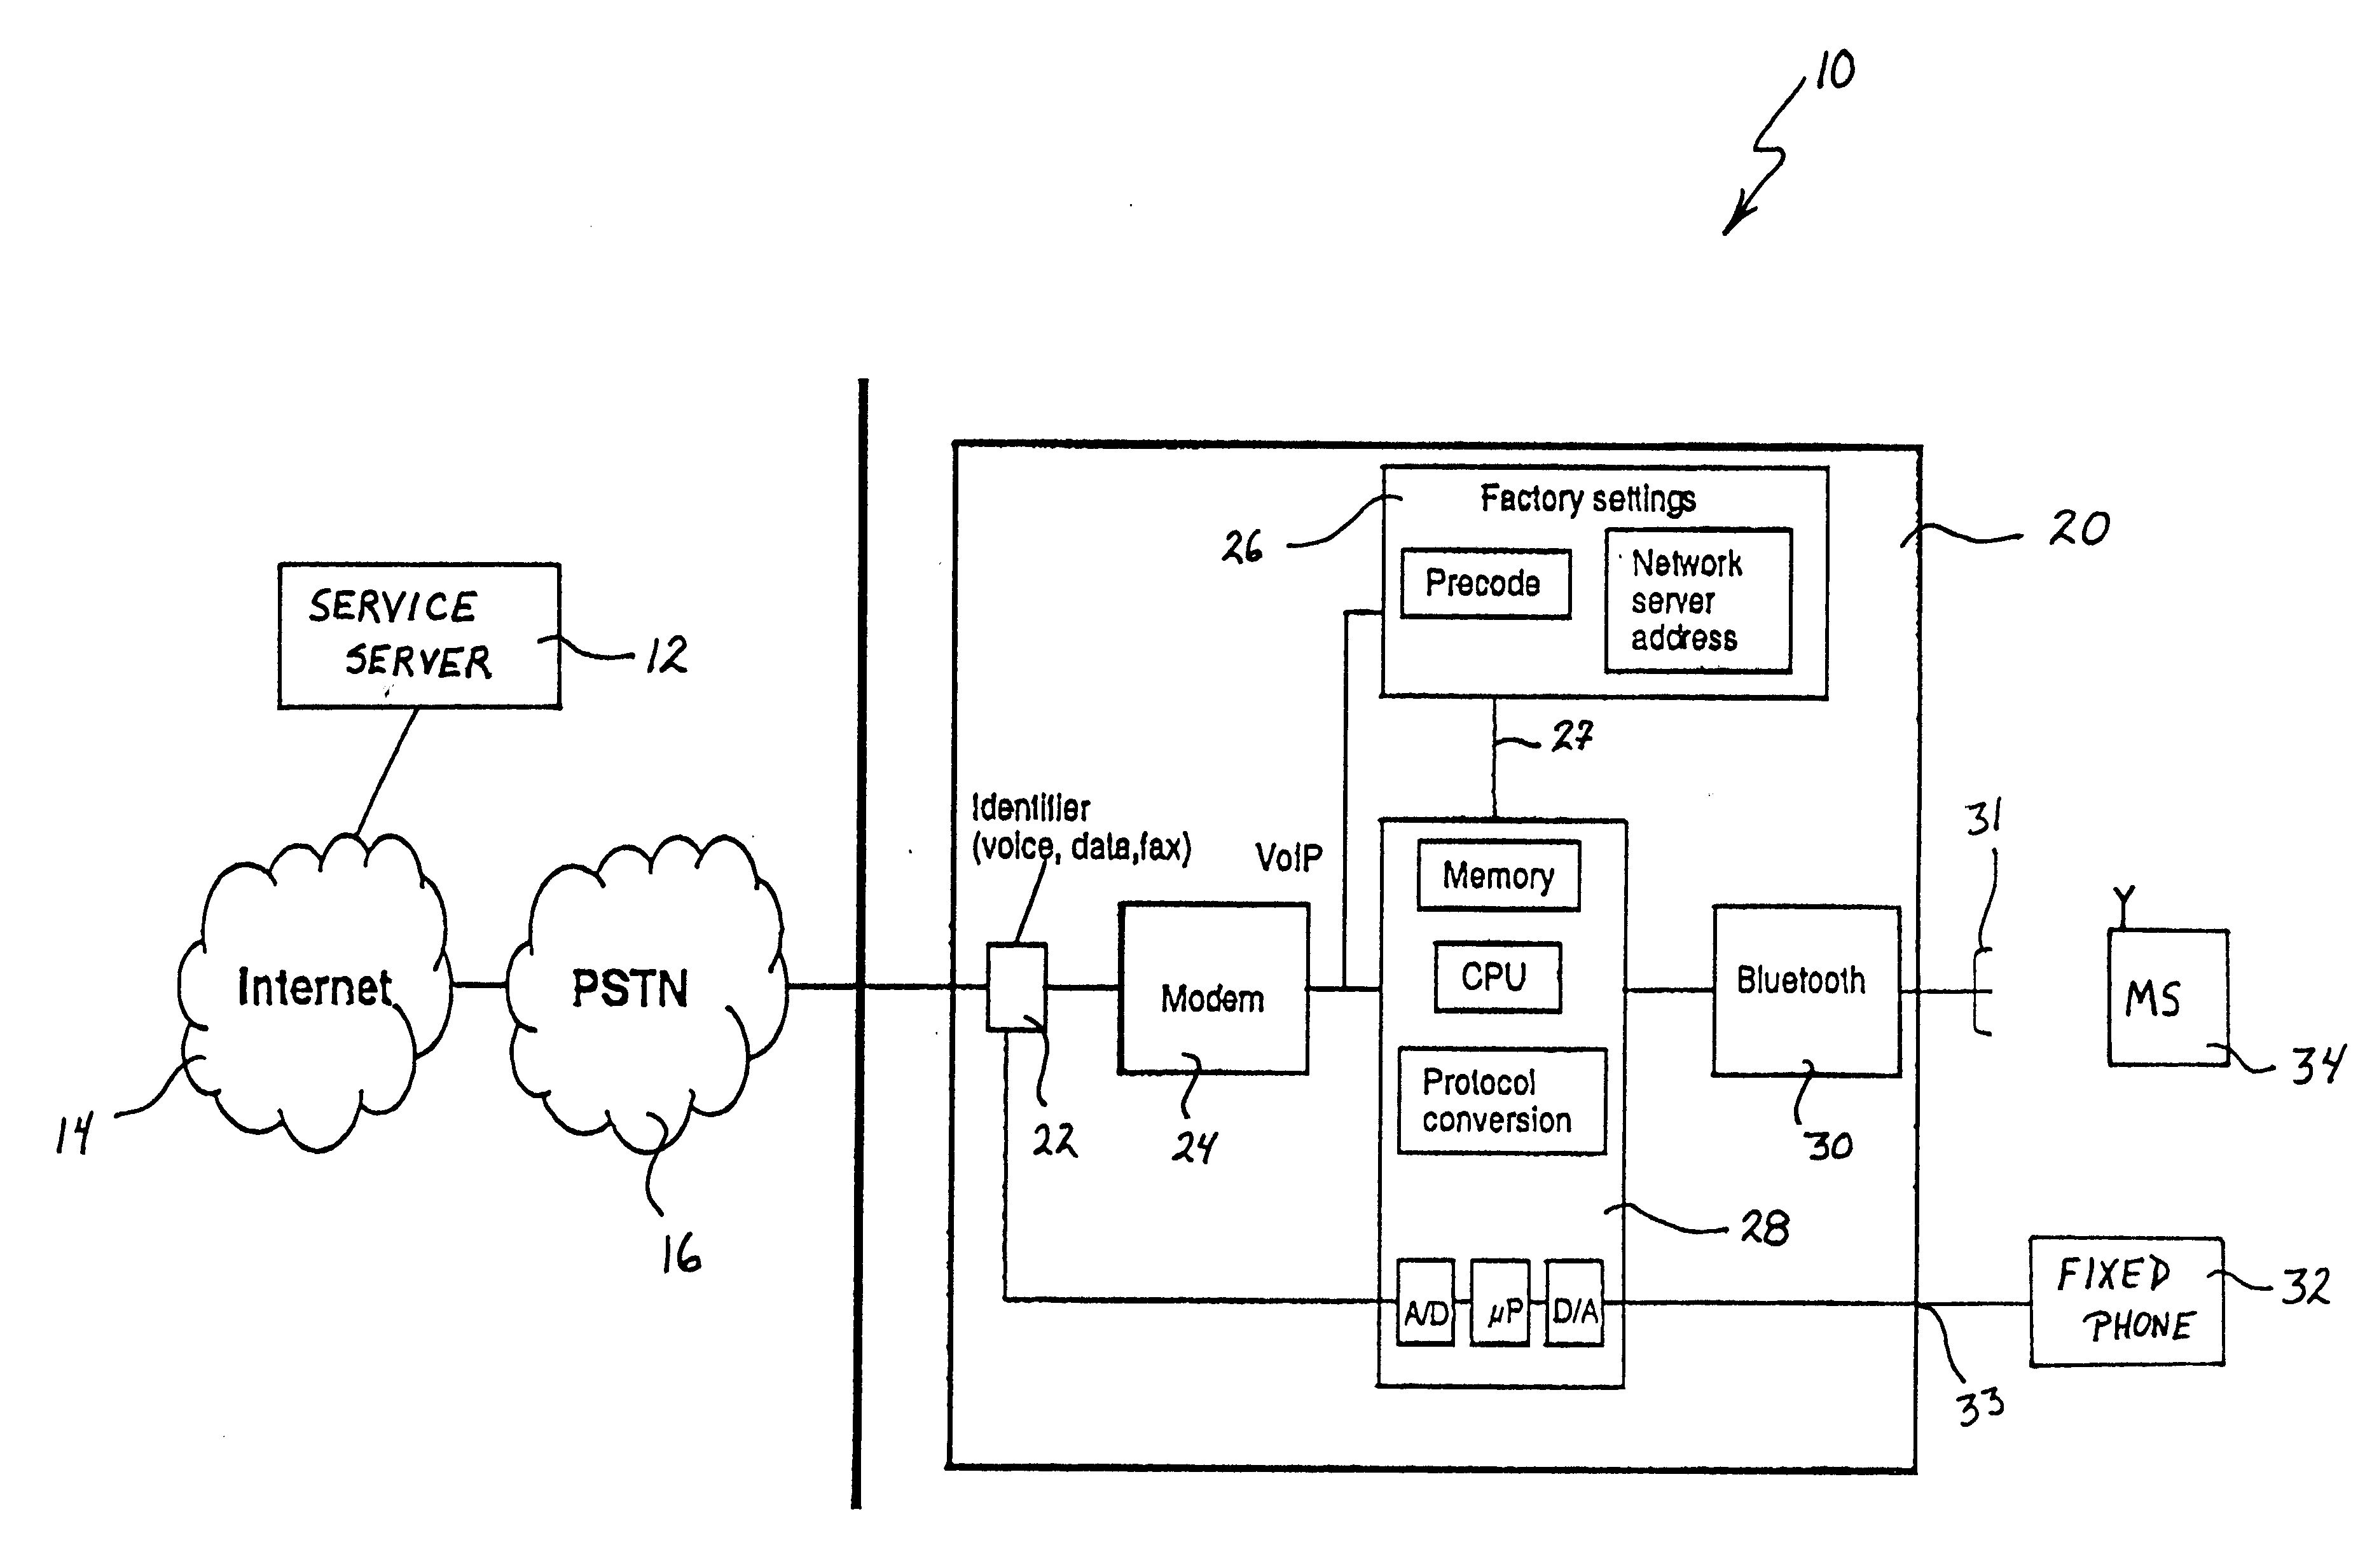 Apparatus for providing information services to a telecommunication device user